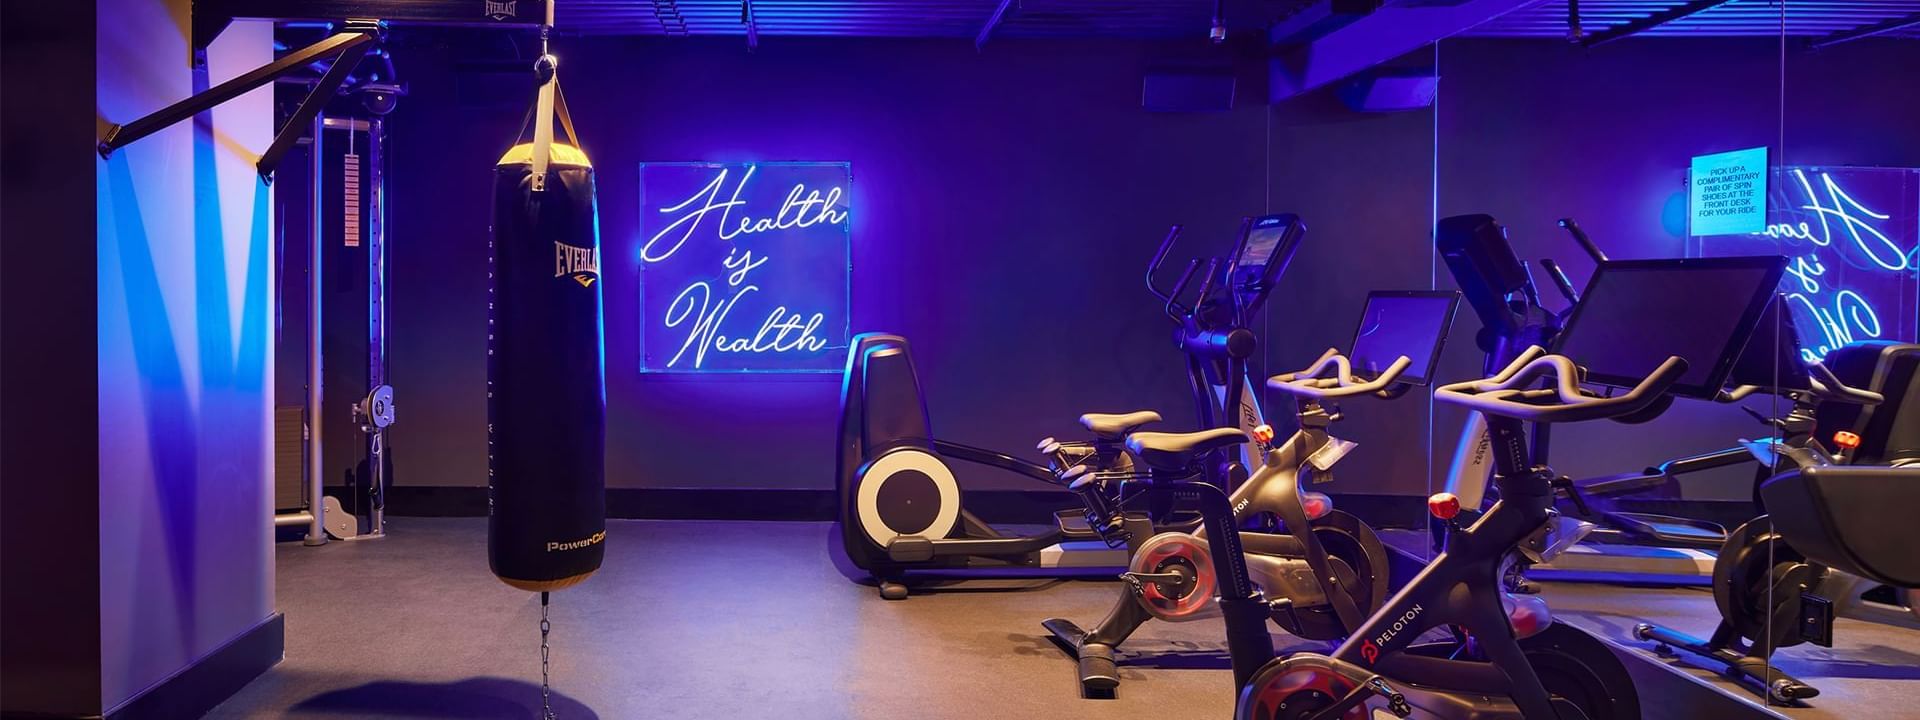 Interior of the fitness center at Gansevoort Meatpacking NYC